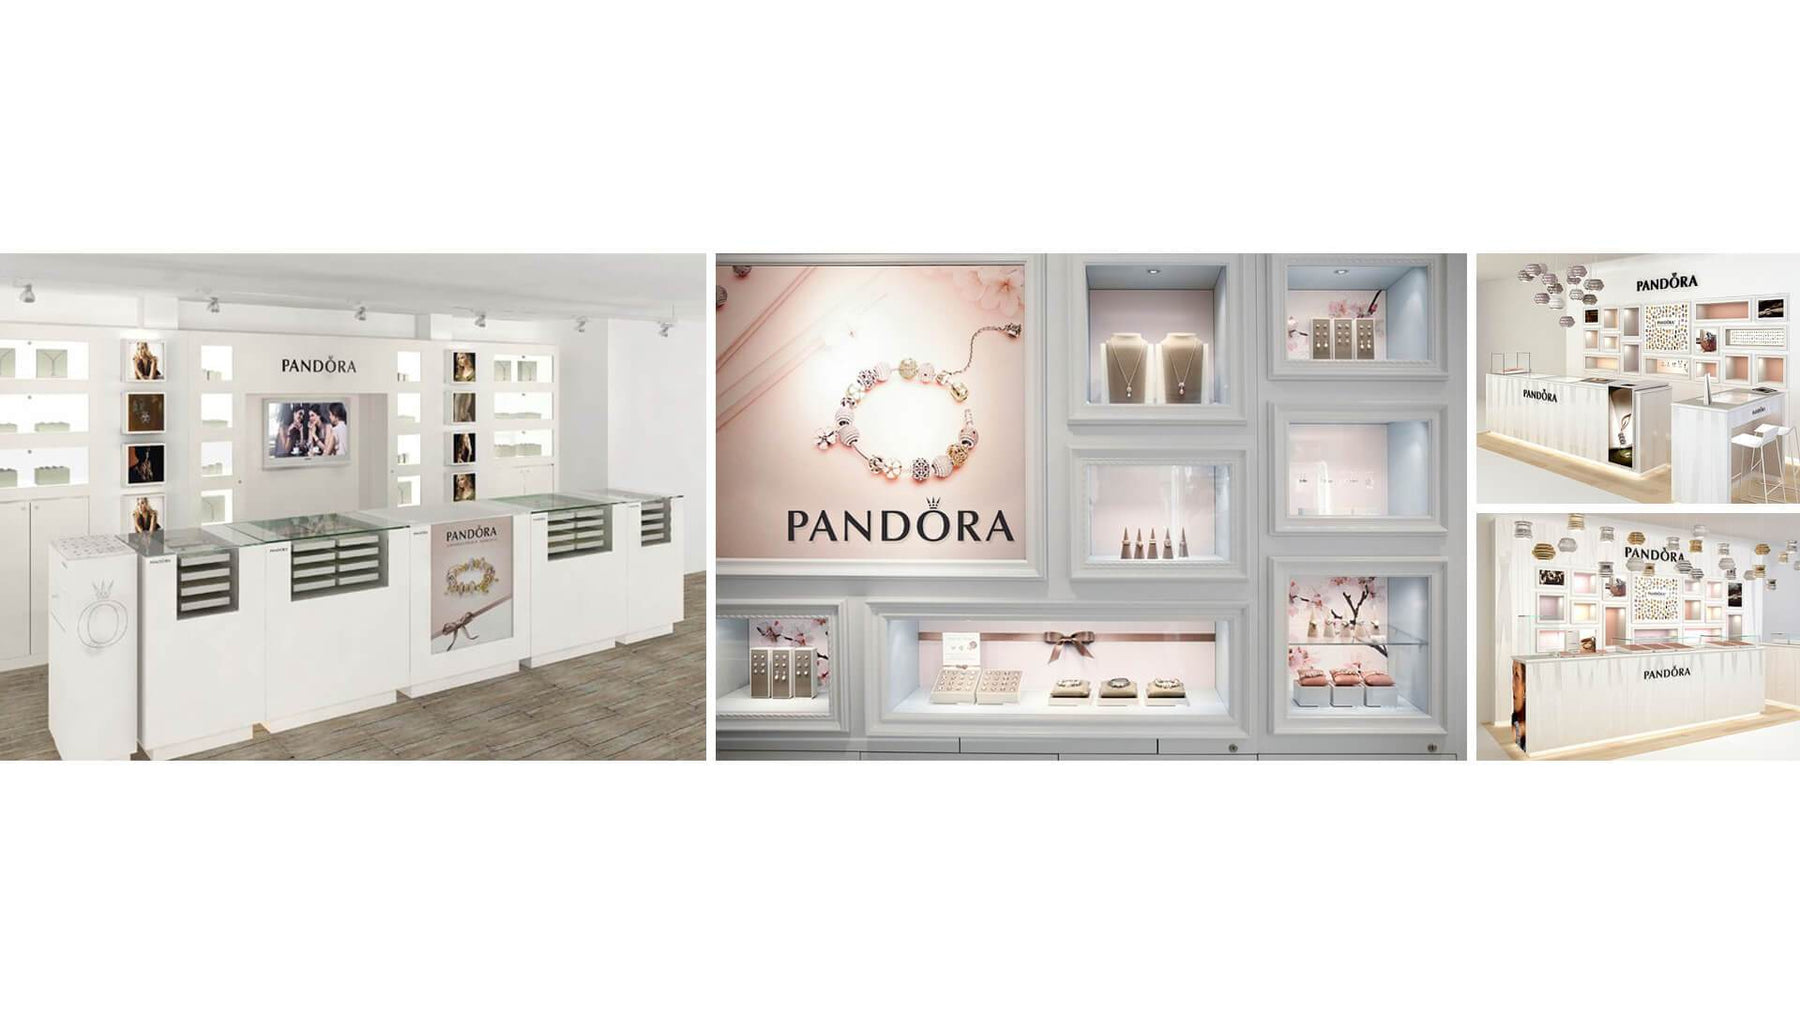 What do you think of the design of the Pandora jewelry shop? - M2 Retail